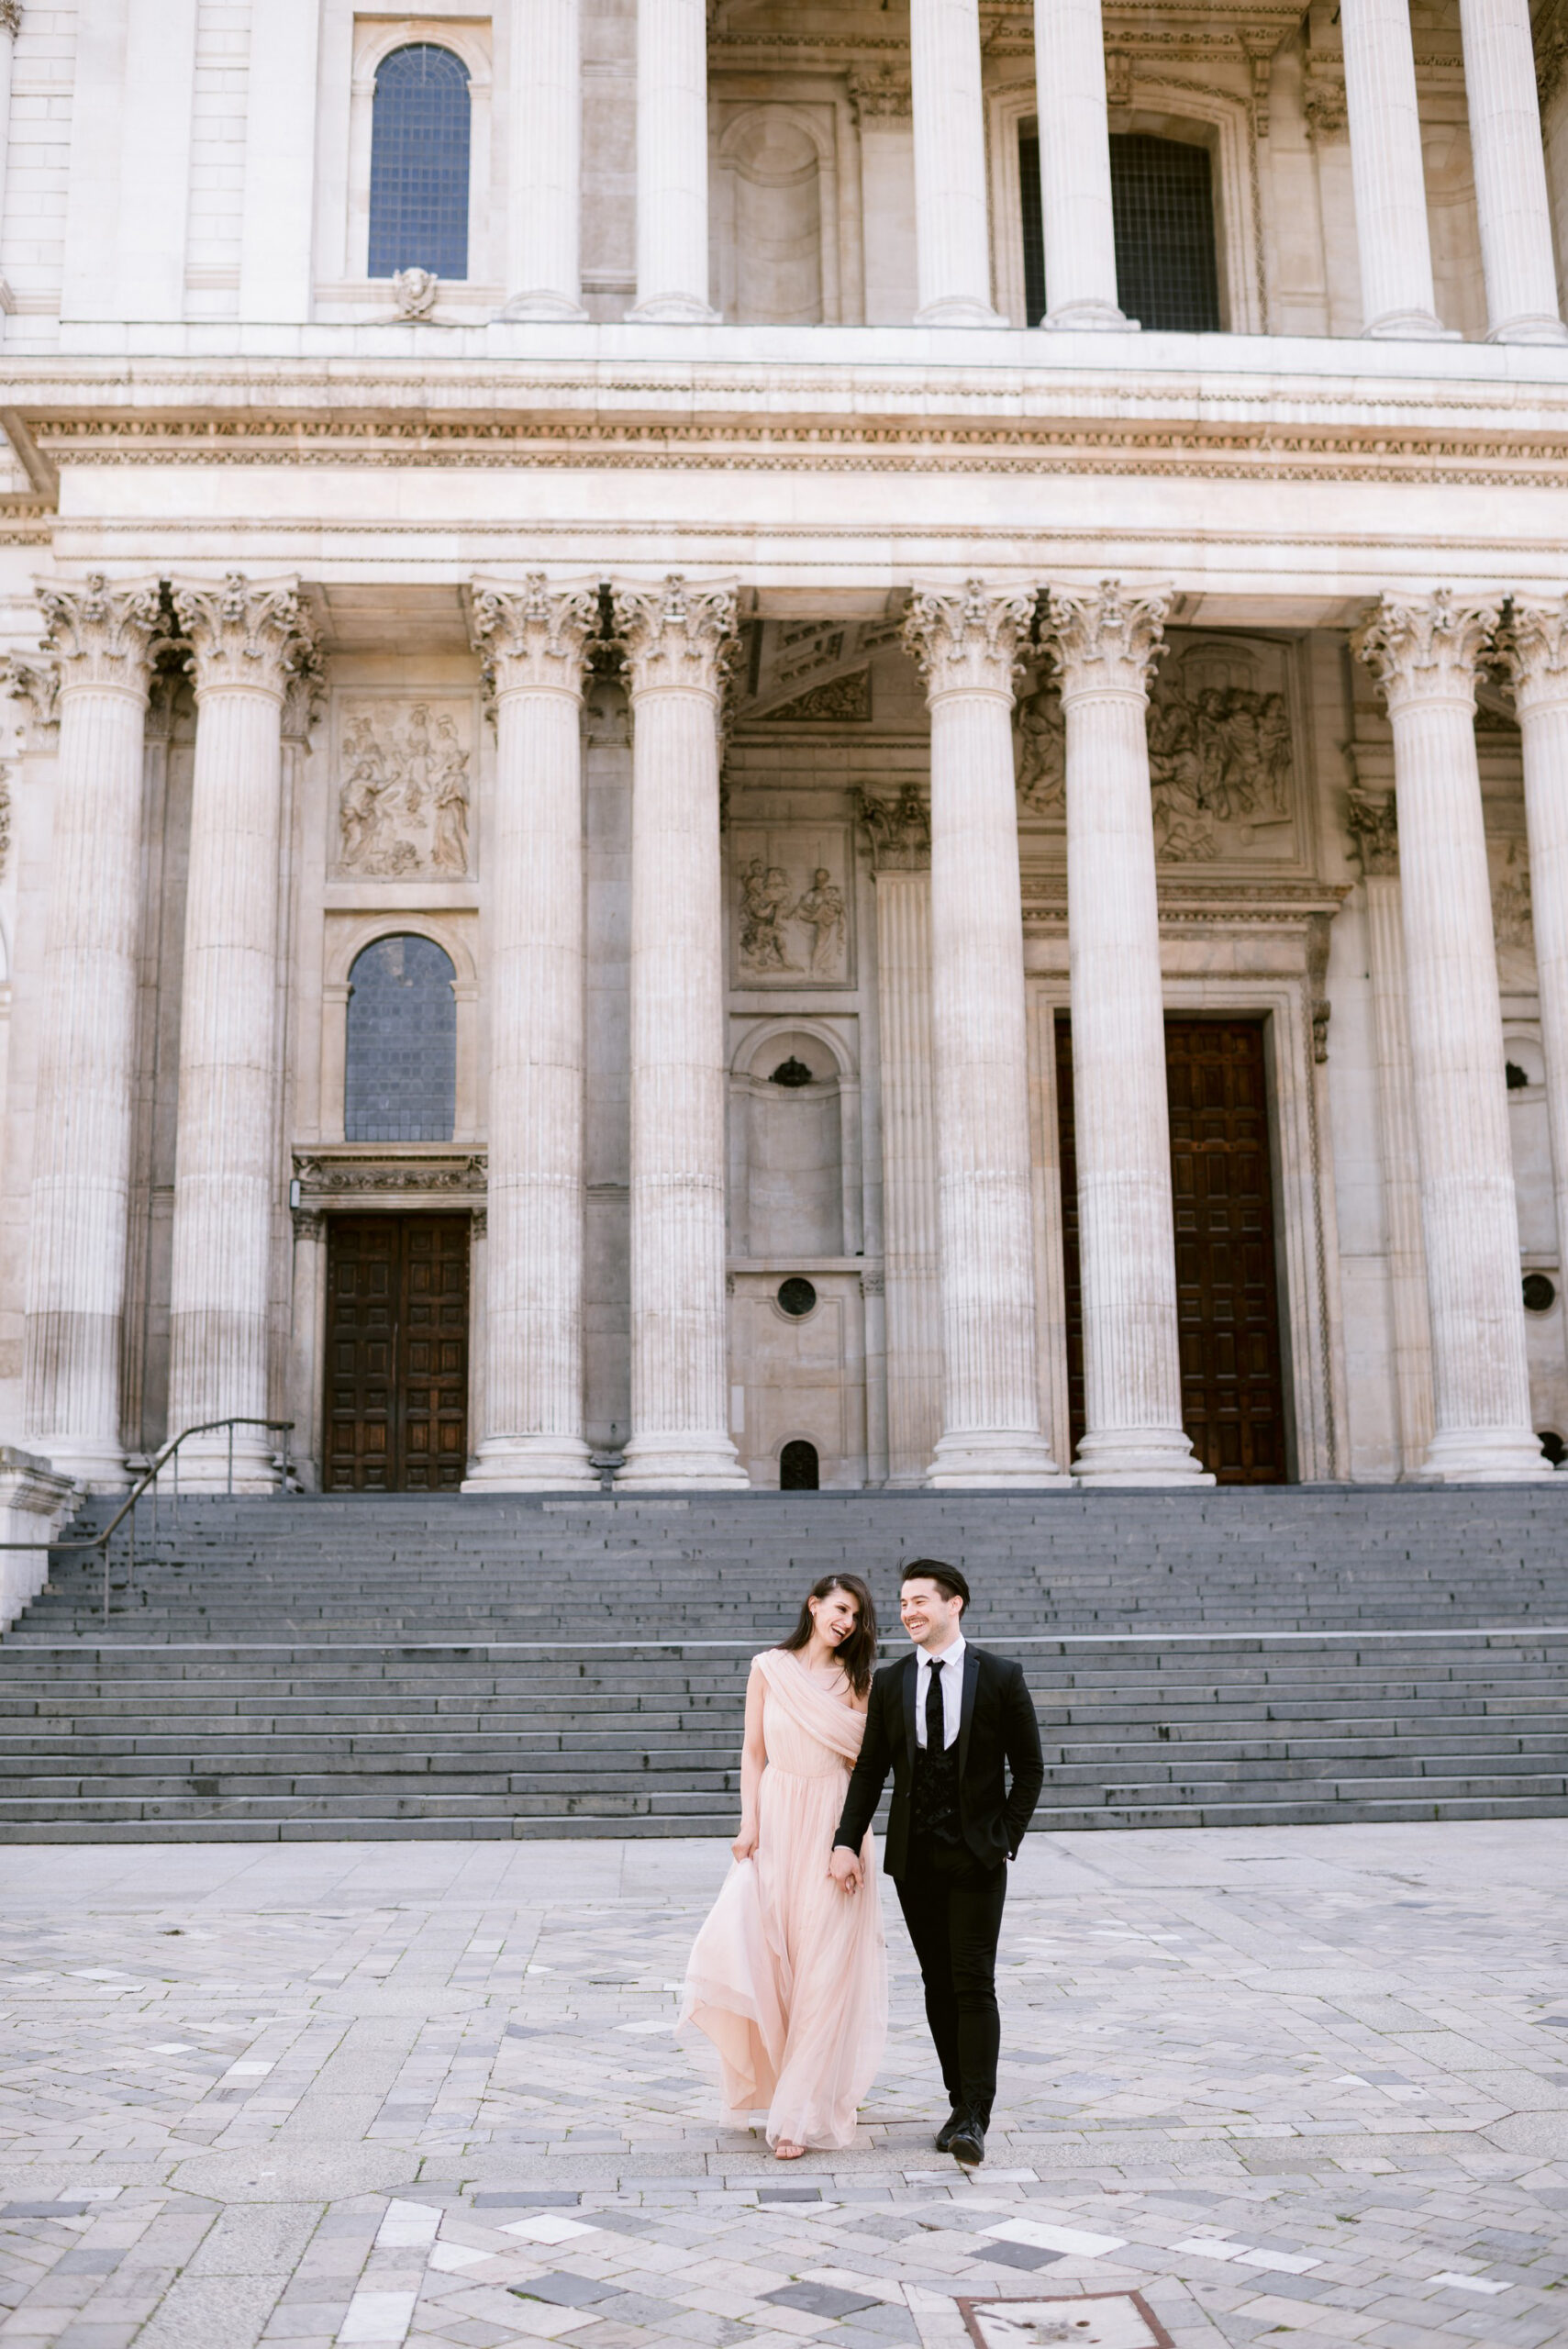 Katia and John photographed by St Paul's Cathedral in London. She wears a pale coral longline off the shoulder dress. He's in black tie and suit. Captured by Eva Tarnok Photography